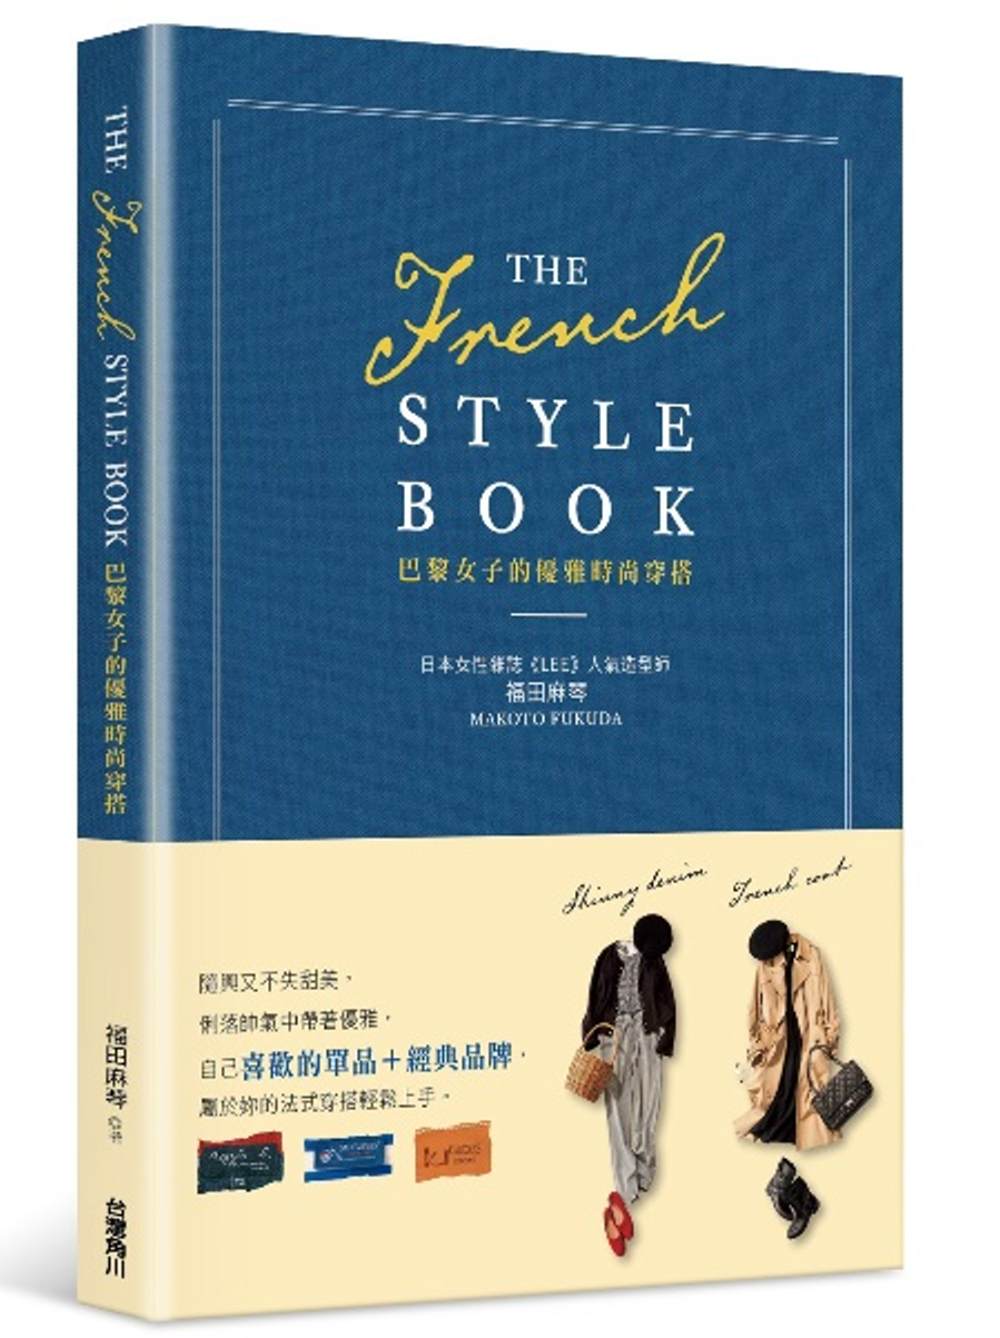 THE FRENCH STYLE BOOK 巴黎女子的優雅時...